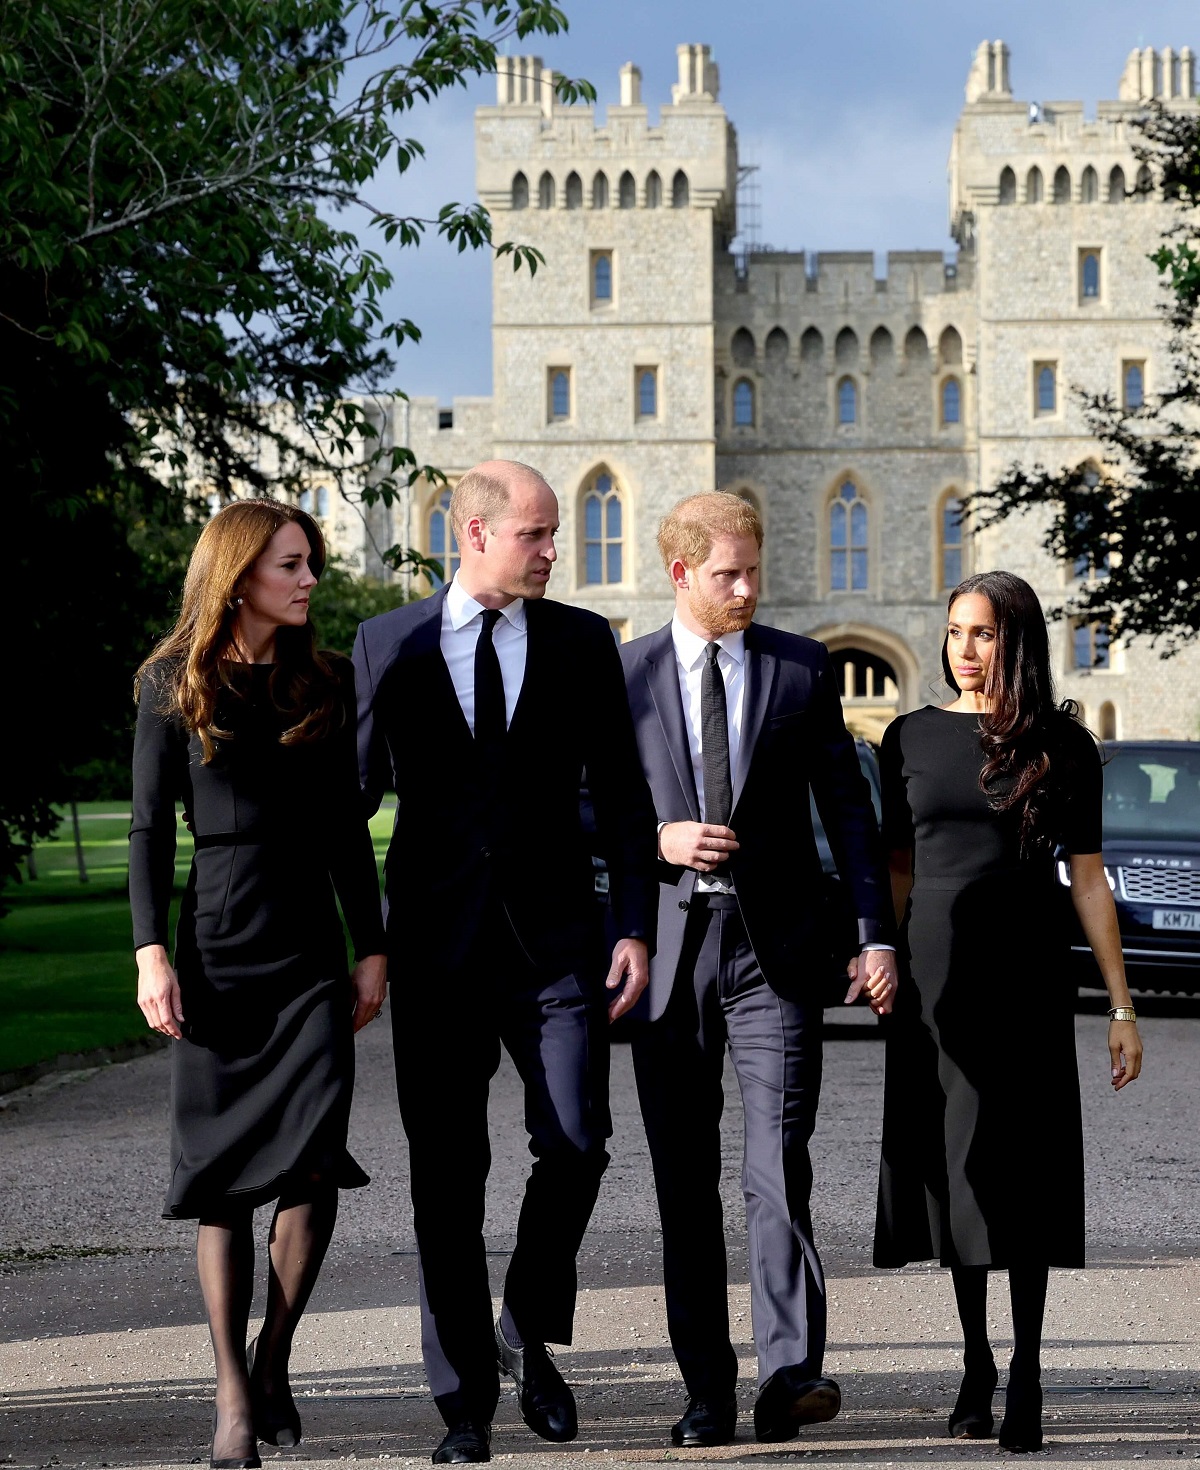 Kate Middleton, Prince William, Prince Harry, and Meghan Markle arrive at Windsor to view flowers and tributes to Queen Elizabeth II